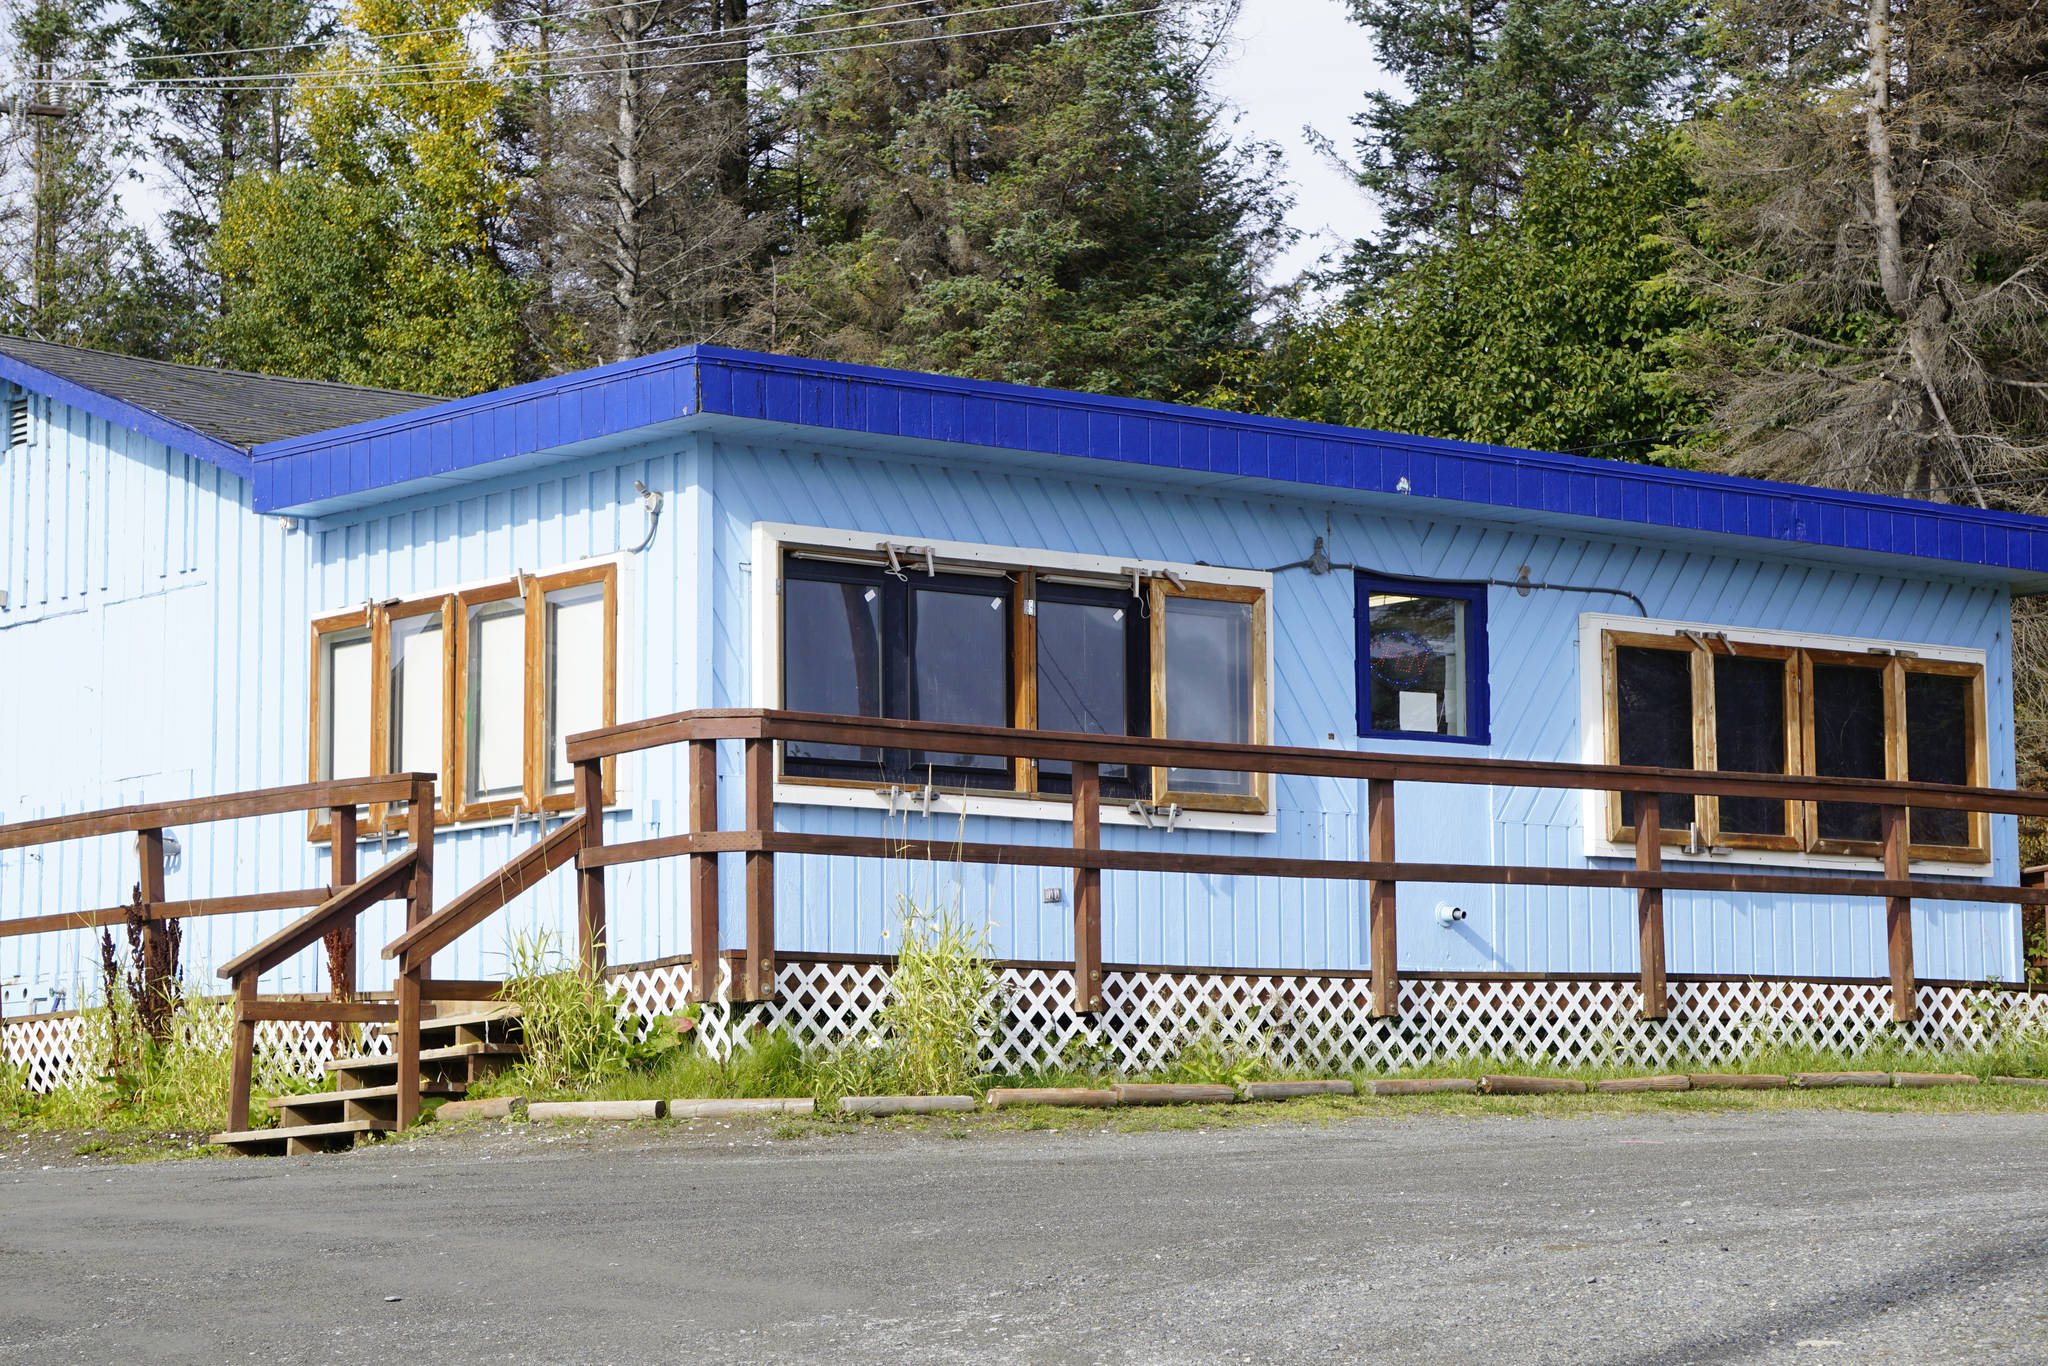 The distinctive blue building of Barb’s Video on Main Street is seen in this photo taken Sept. 22, 2018, in Homer, Alaska. (Photo by Michael Armstrong/Homer News)